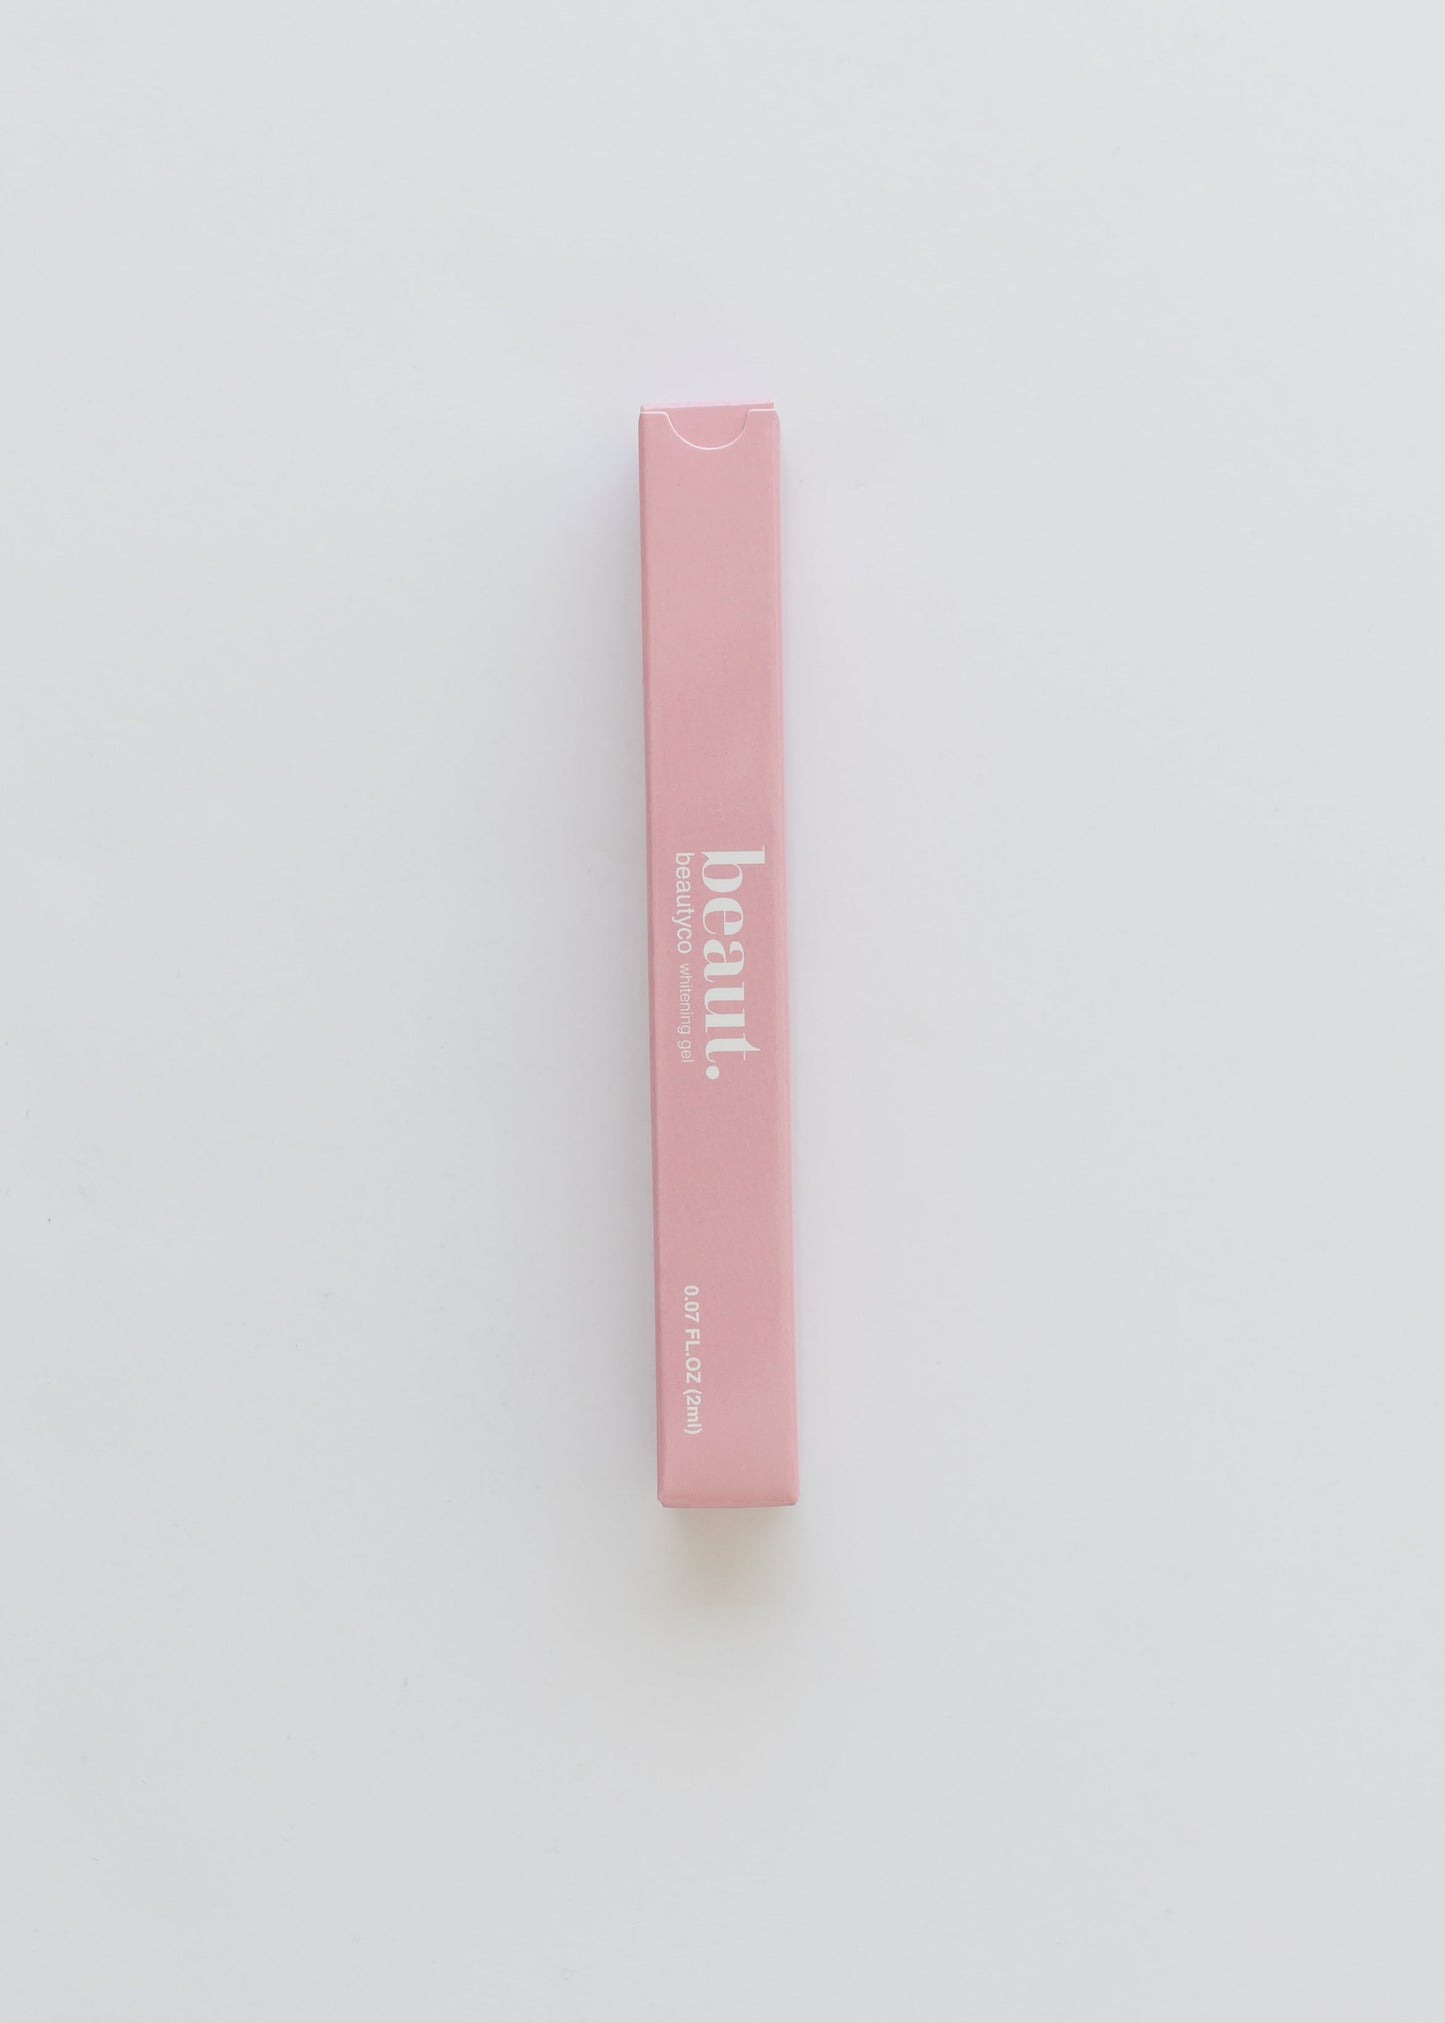 beaut. Smile Pen Refill Gifts